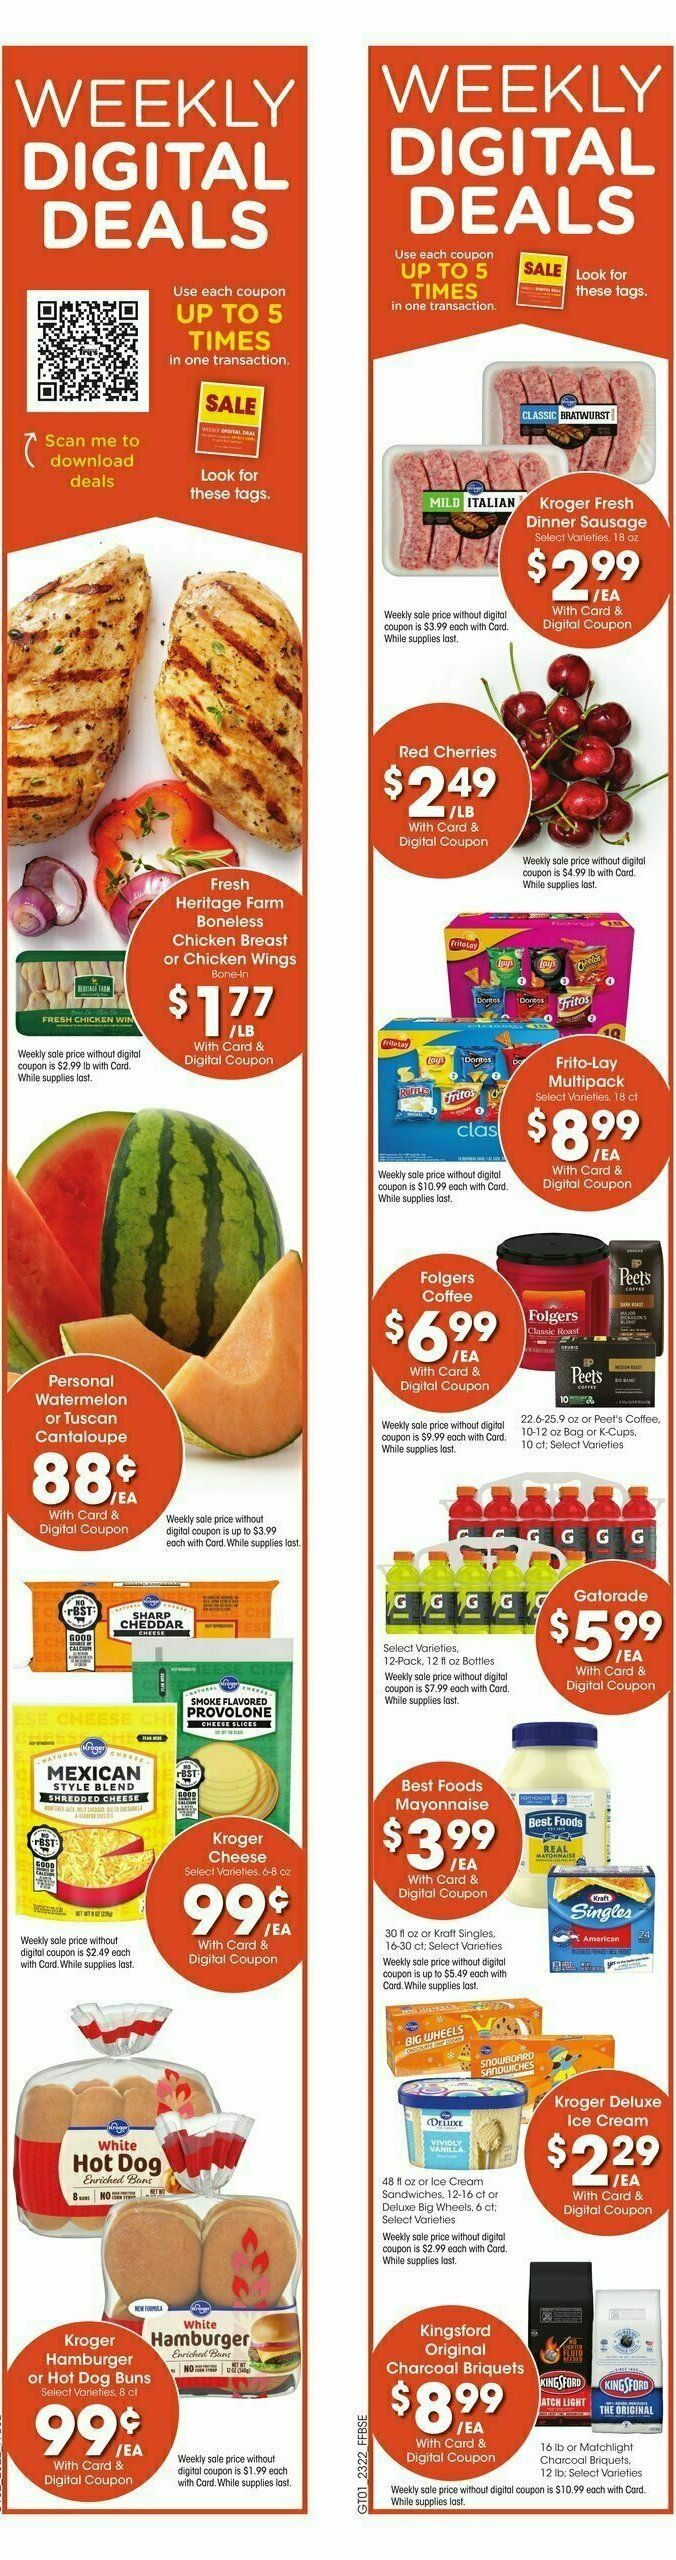 Fry's Food Weekly Ad from June 28